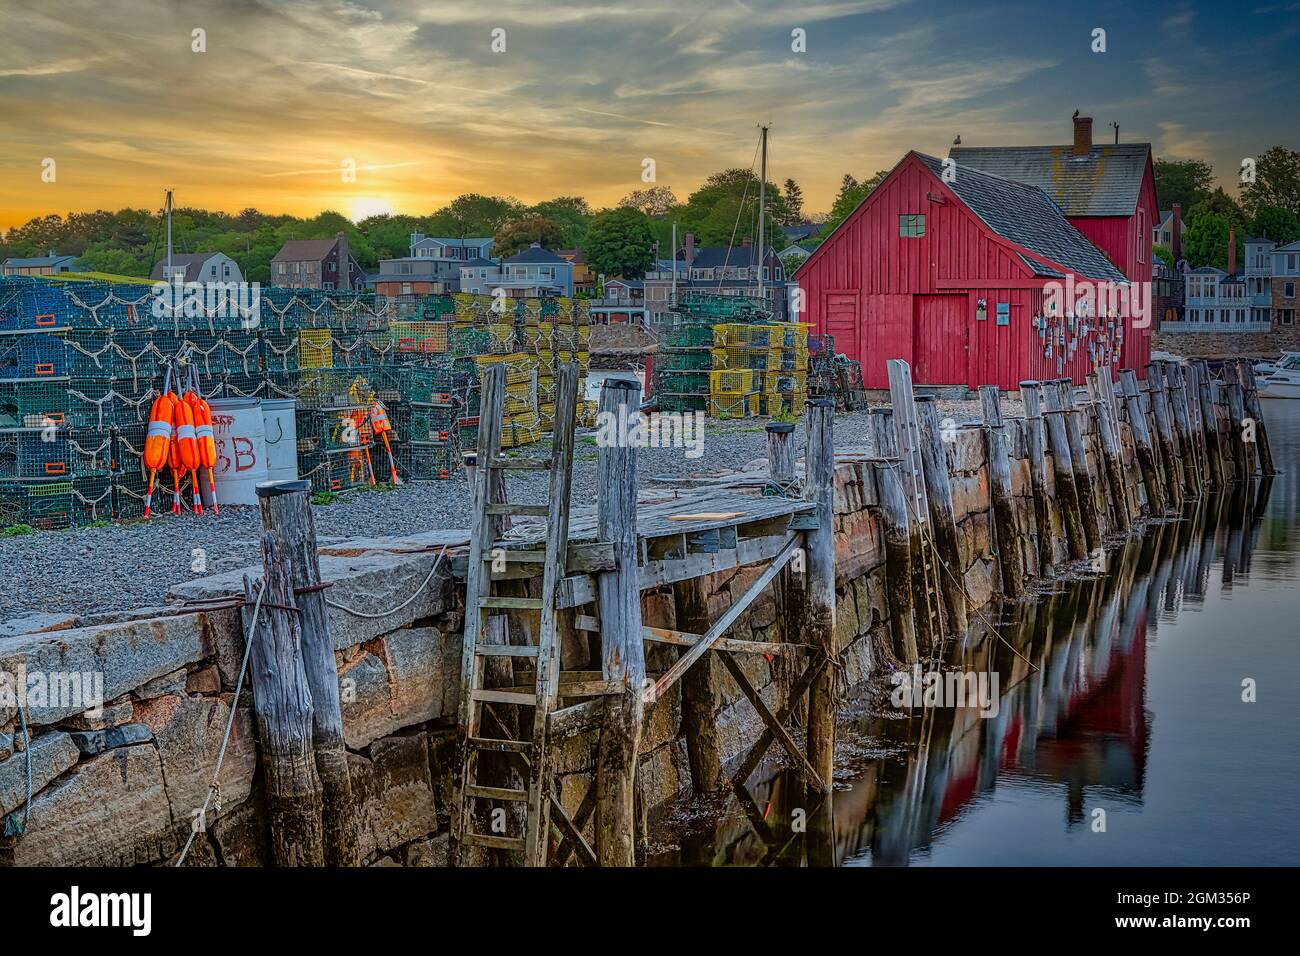 Sunrise At Motif Number One  - New England's iconic landmark of Bradley Wharf commonly known as Motif Number One during first light in Rockport, Massa Stock Photo